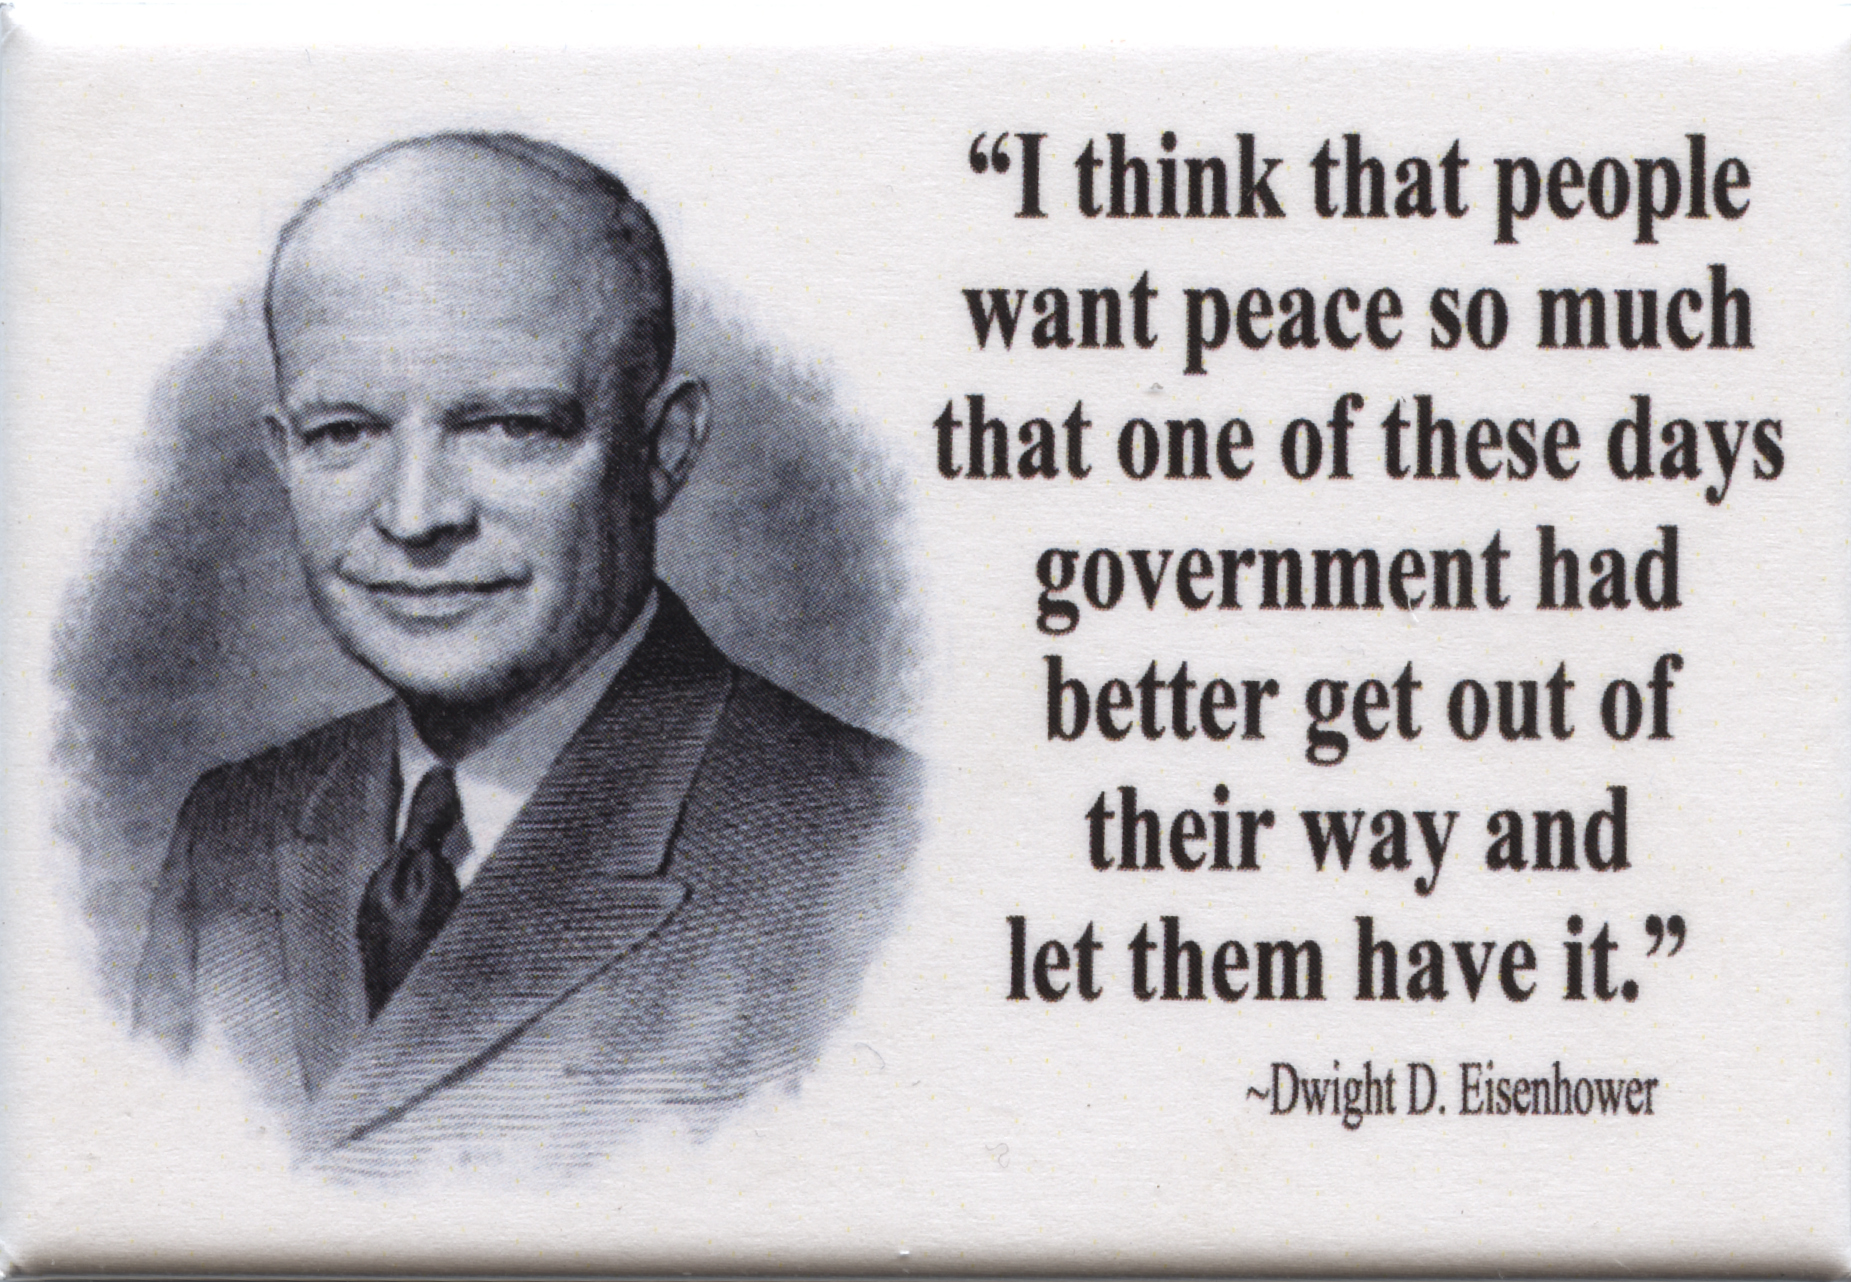 Dwight D. Eisenhower's quote #8